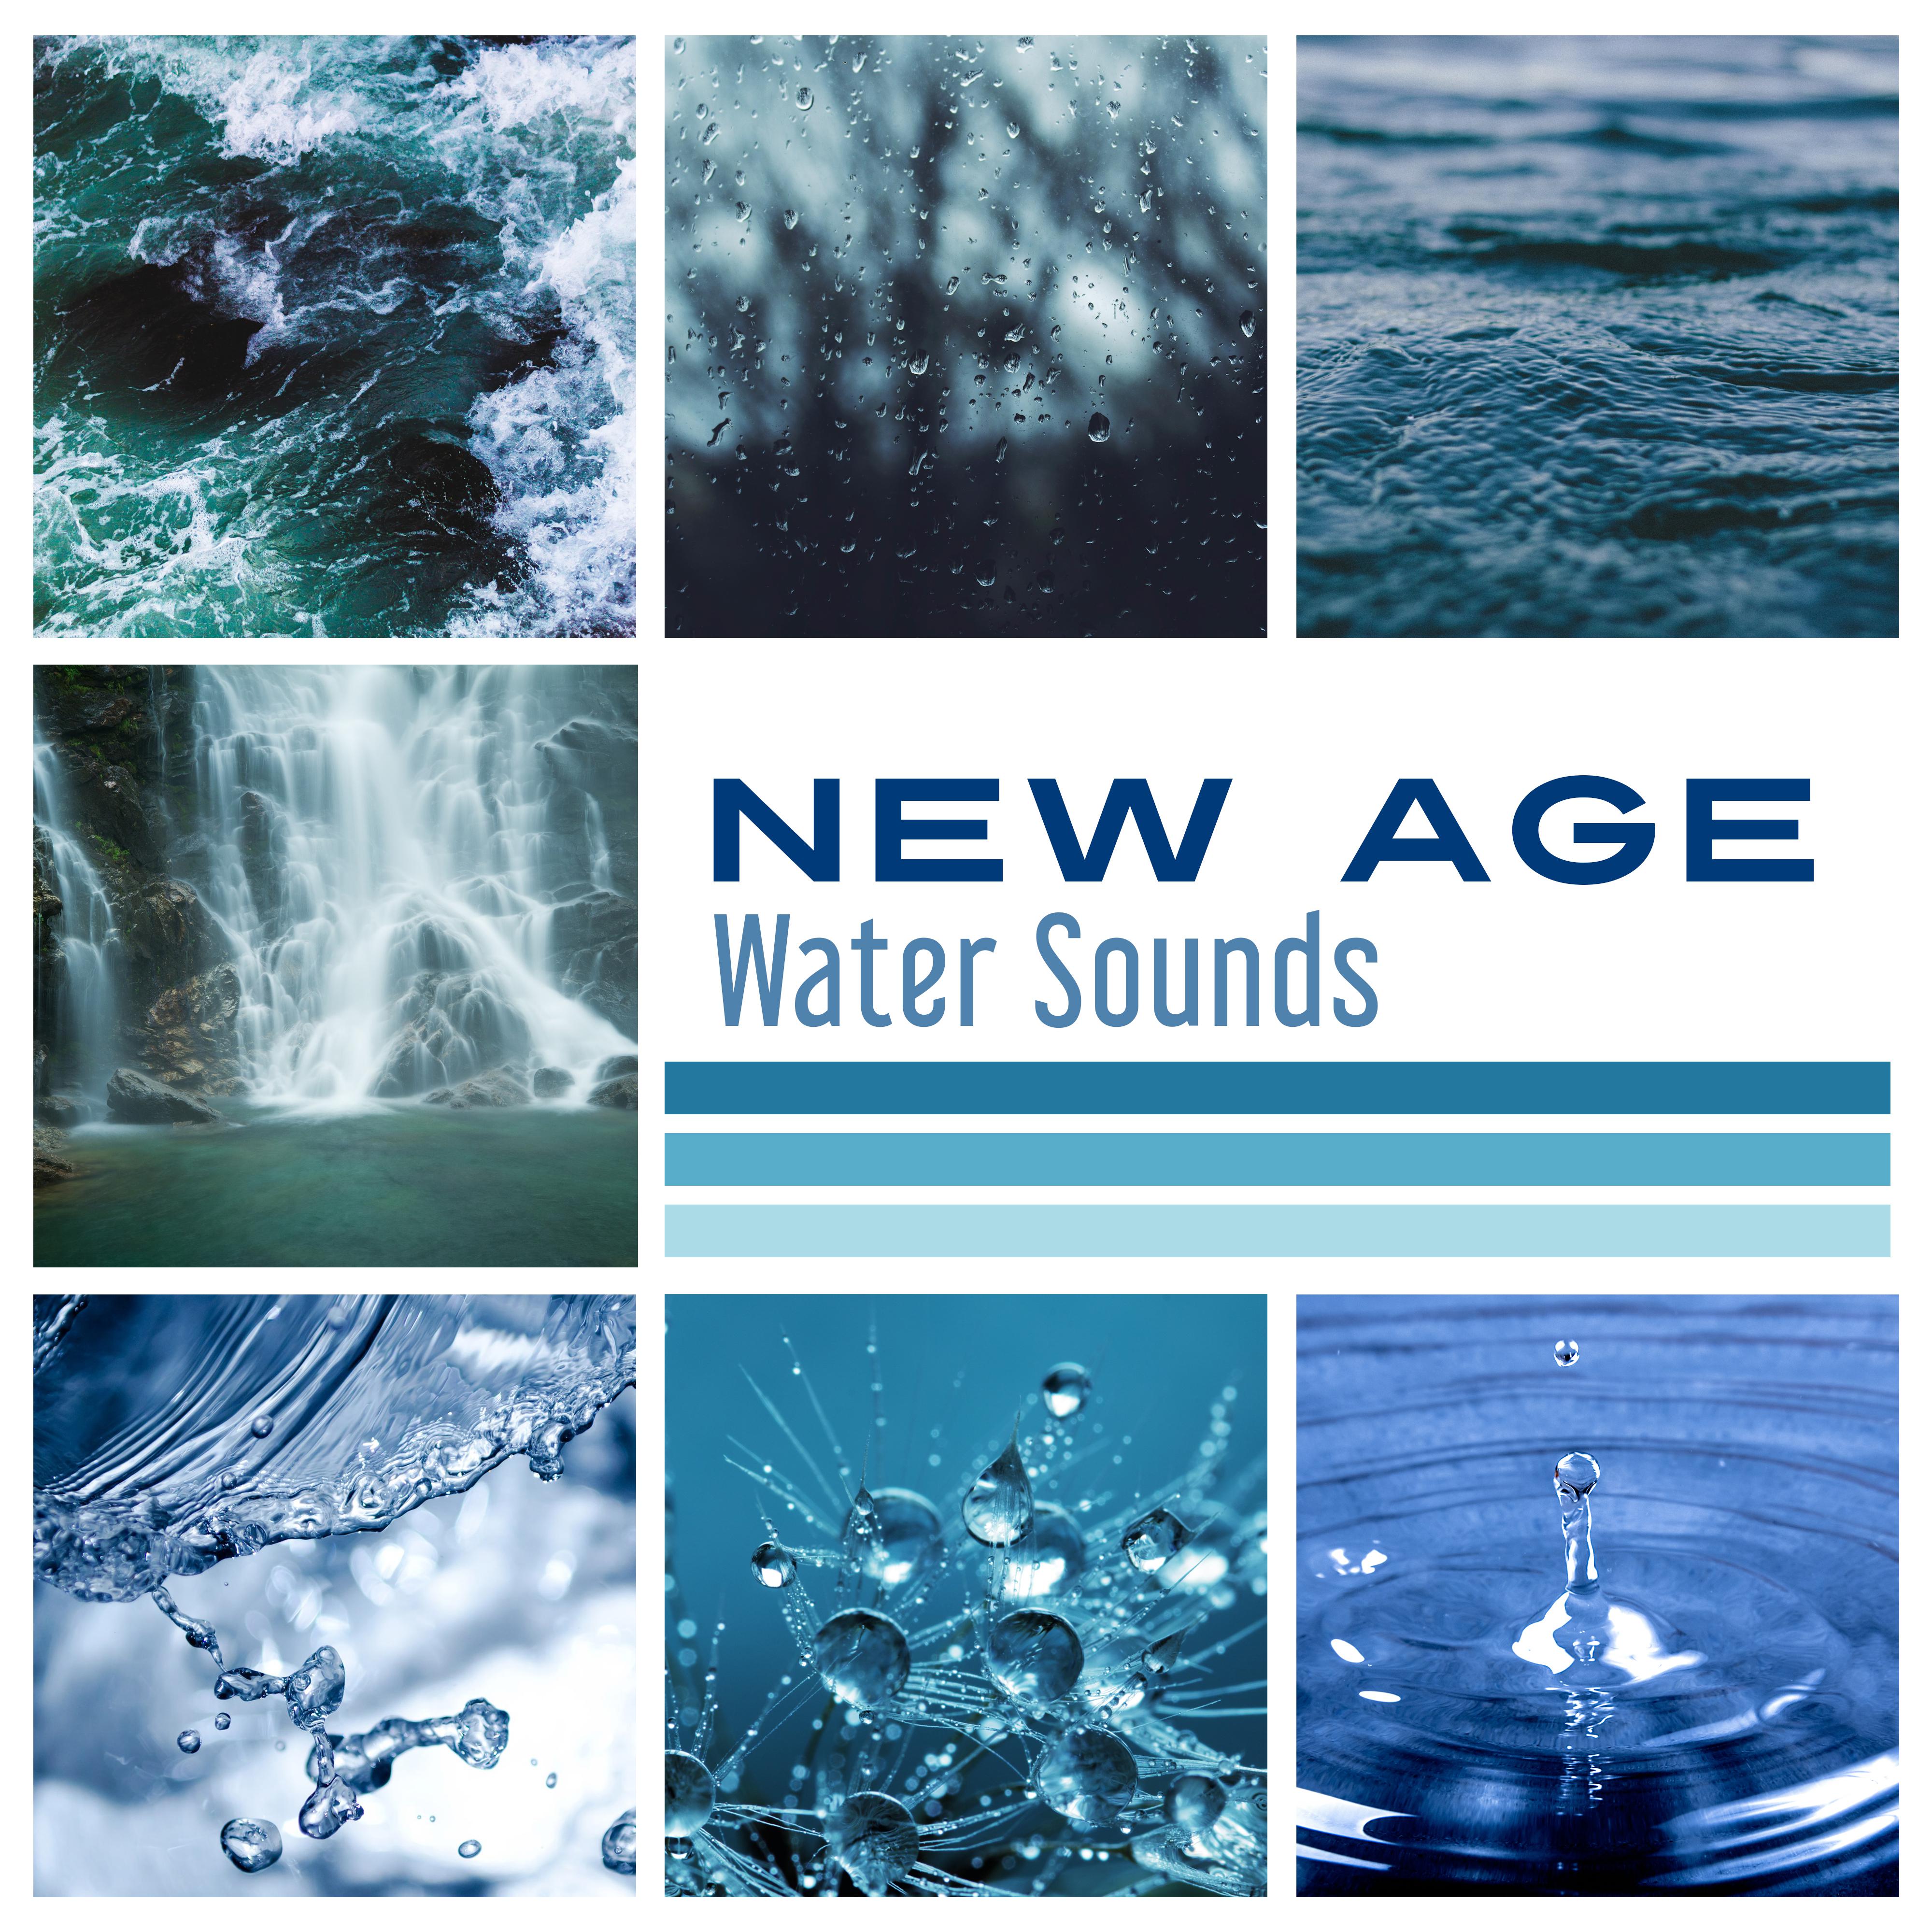 New Age: Water Sounds  Calming Sounds of Water, Healing Therapy, Waves of Calmness, Stress Free